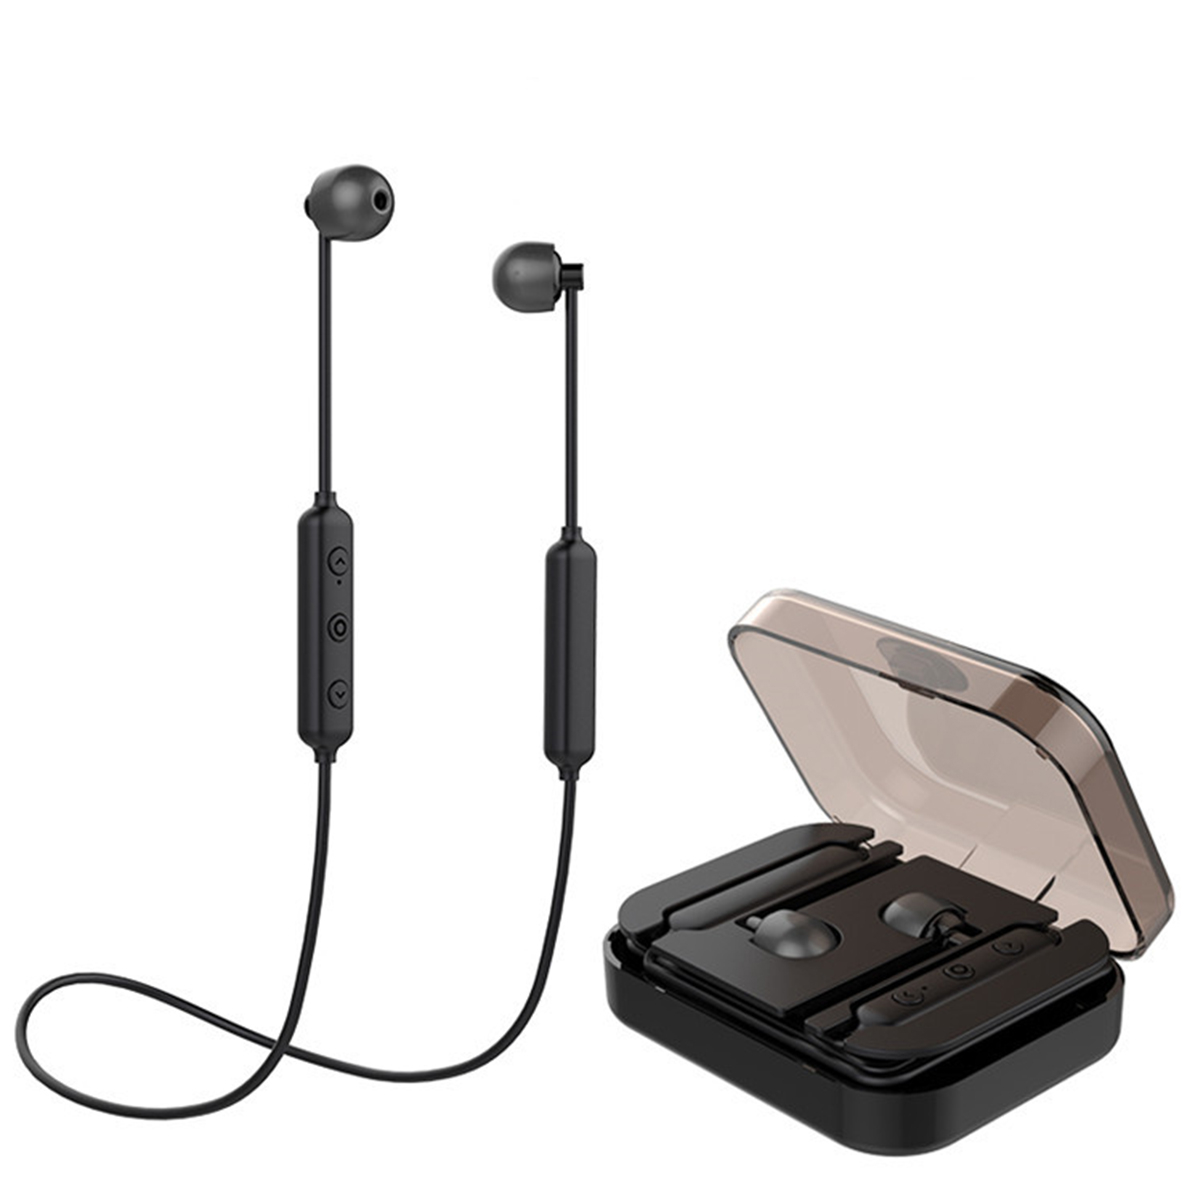 

[bluetooth 5.0] Hifi Wireless bluetooth Earphone Magnetic Adsorption Stereo Sports Headphone with Mic with Chariging Box